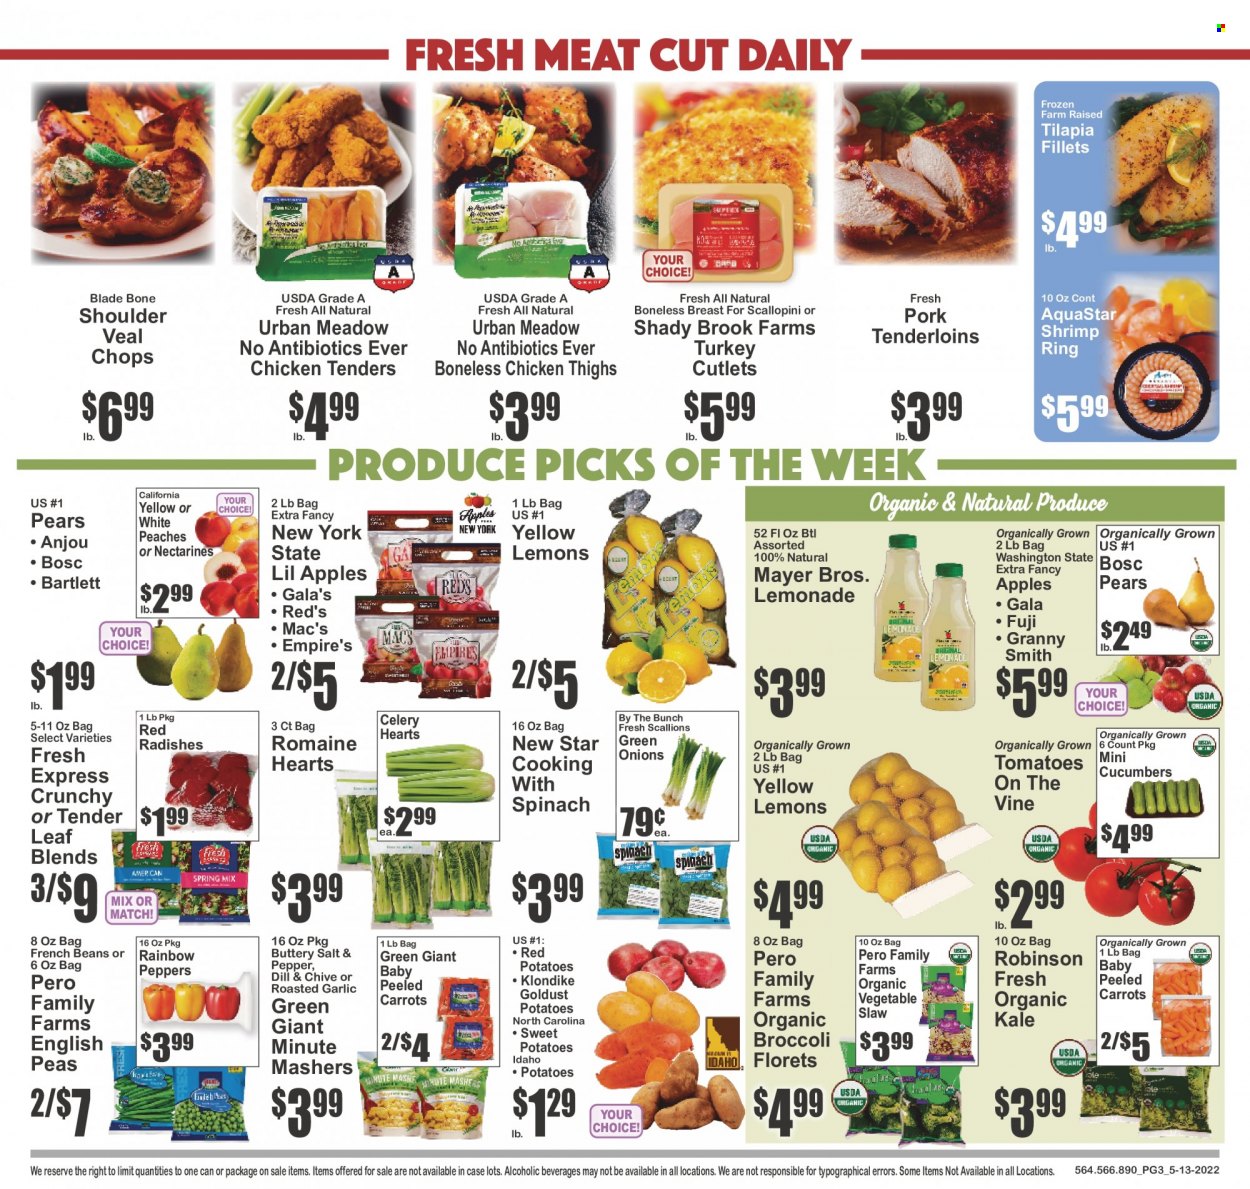 thumbnail - Key Food Flyer - 05/13/2022 - 05/19/2022 - Sales products - beans, broccoli, carrots, celery, cucumber, french beans, radishes, sweet potato, tomatoes, kale, potatoes, peas, peppers, green onion, red potatoes, apples, Gala, pears, Granny Smith, tilapia, shrimps, chicken tenders, lemonade, Mac’s, chicken thighs, veal cutlet, veal meat, pork tenderloin, nectarines, lemons, peaches. Page 3.